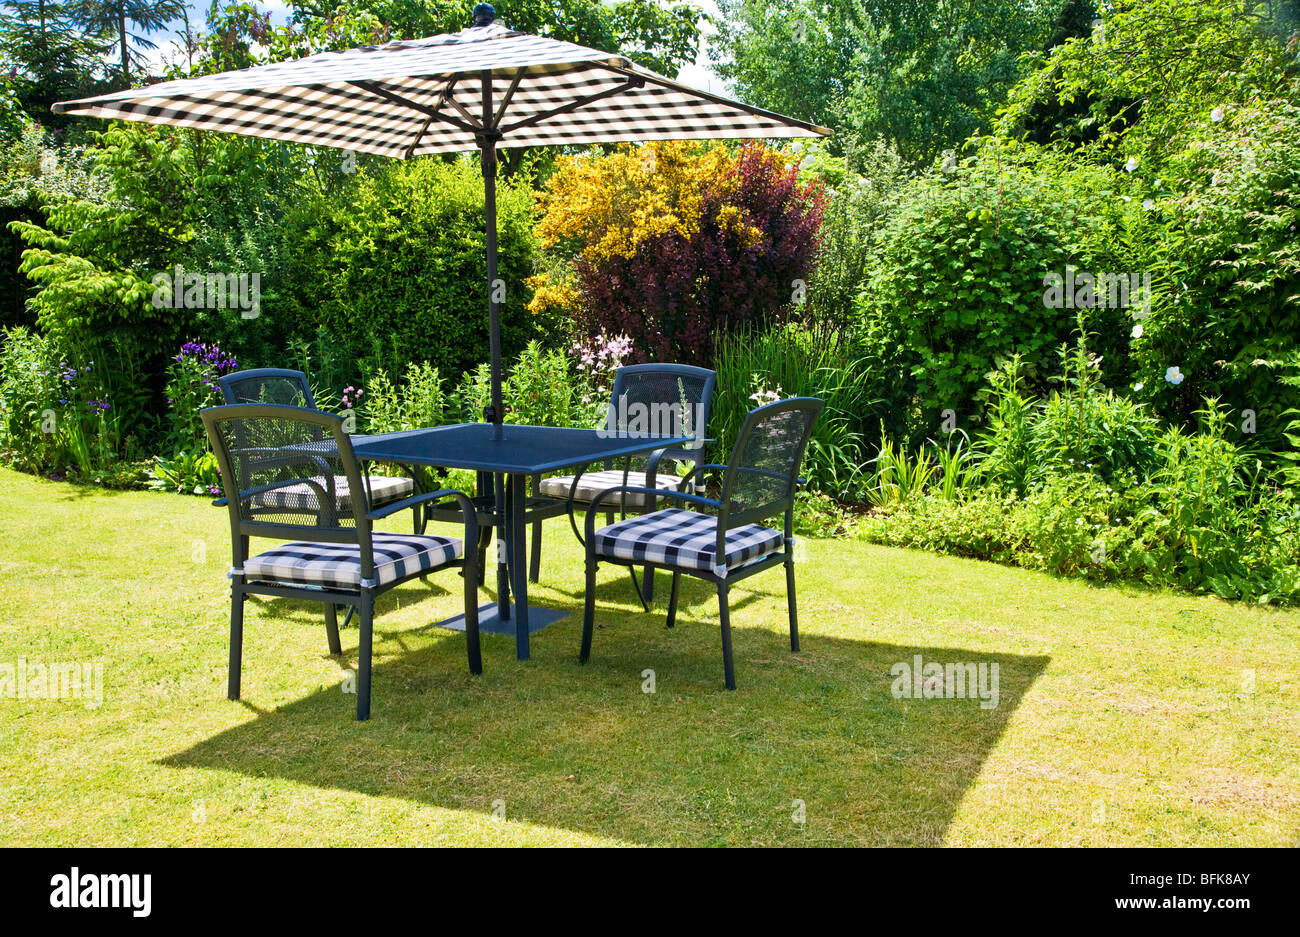 Garden furniture and parasol set out on a lawn in a typical English town or country garden in summer Stock Photo